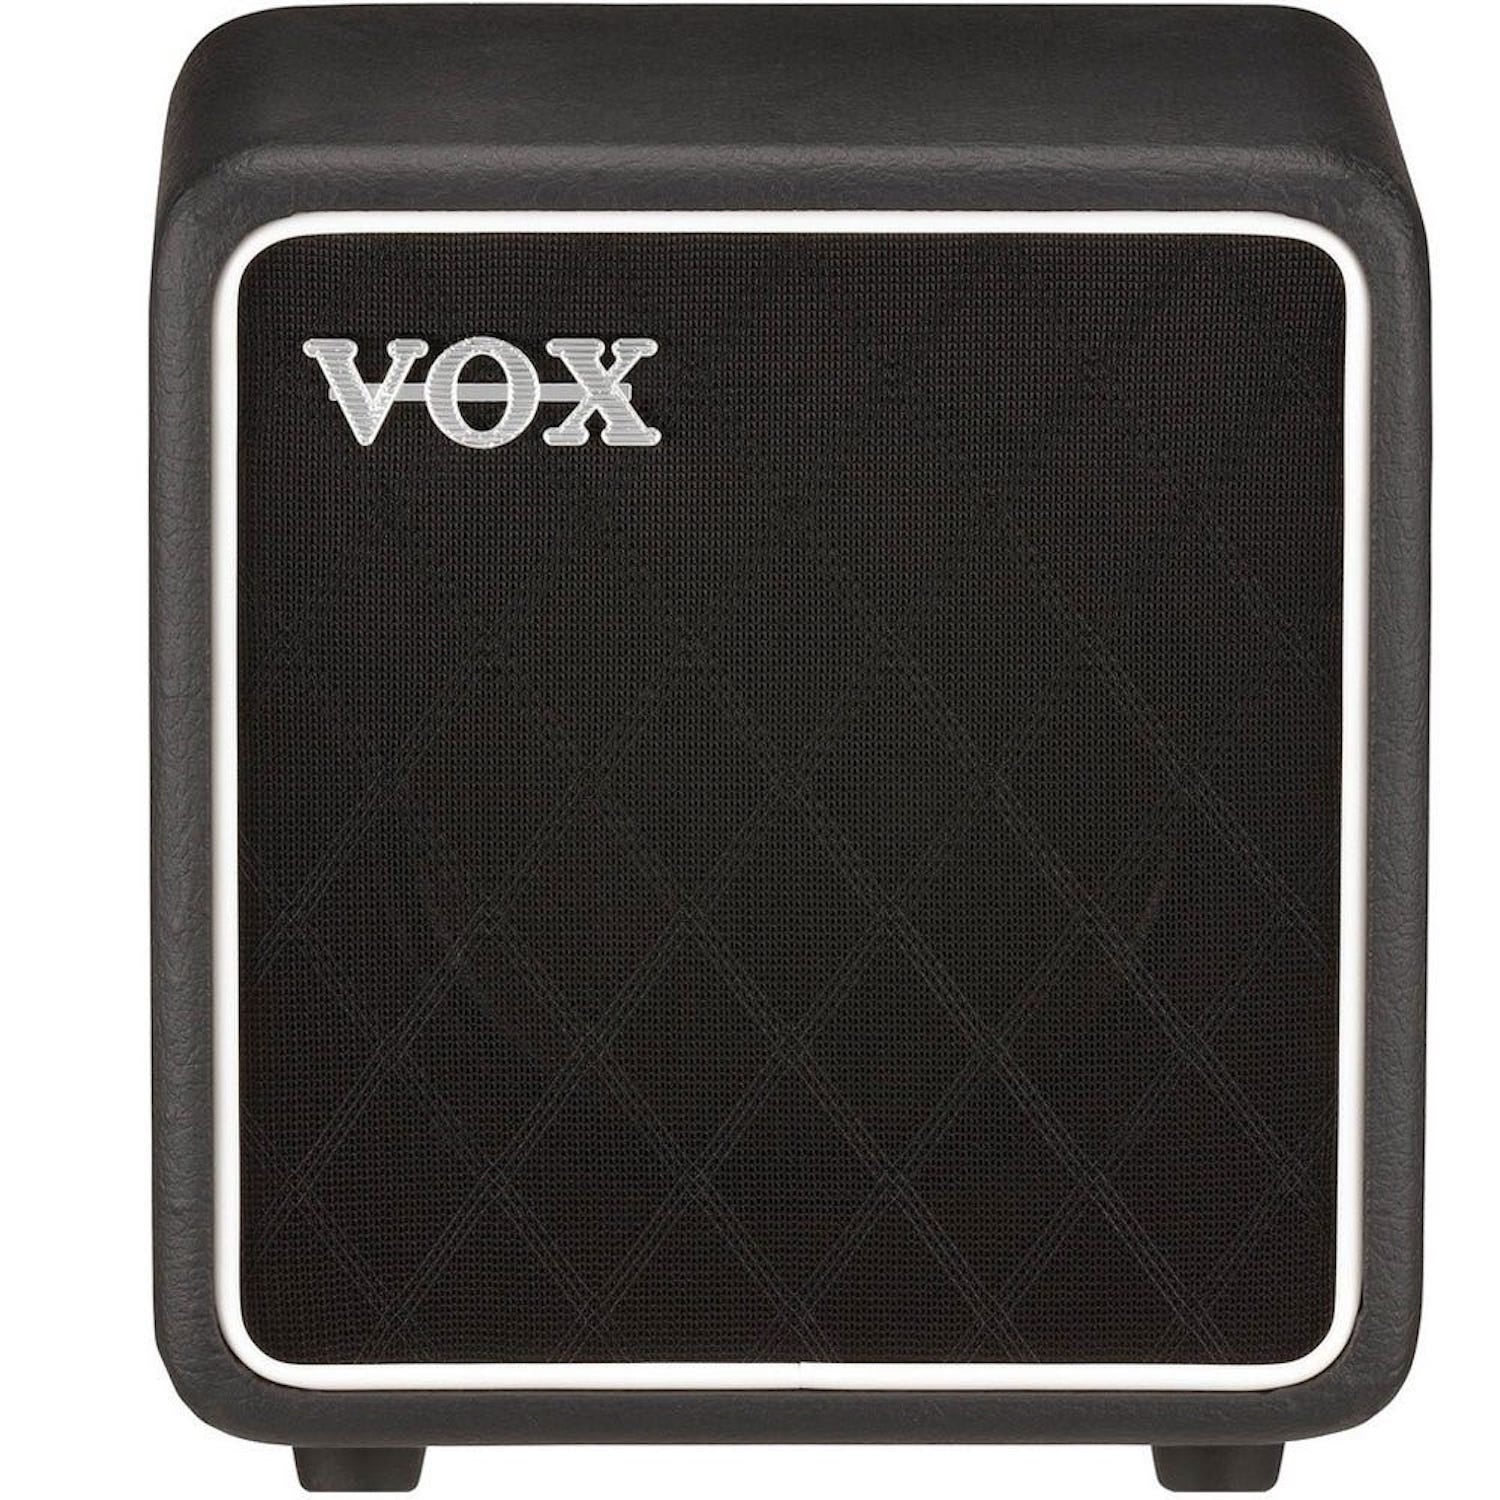 Vox BC108 8-INCH CABINET